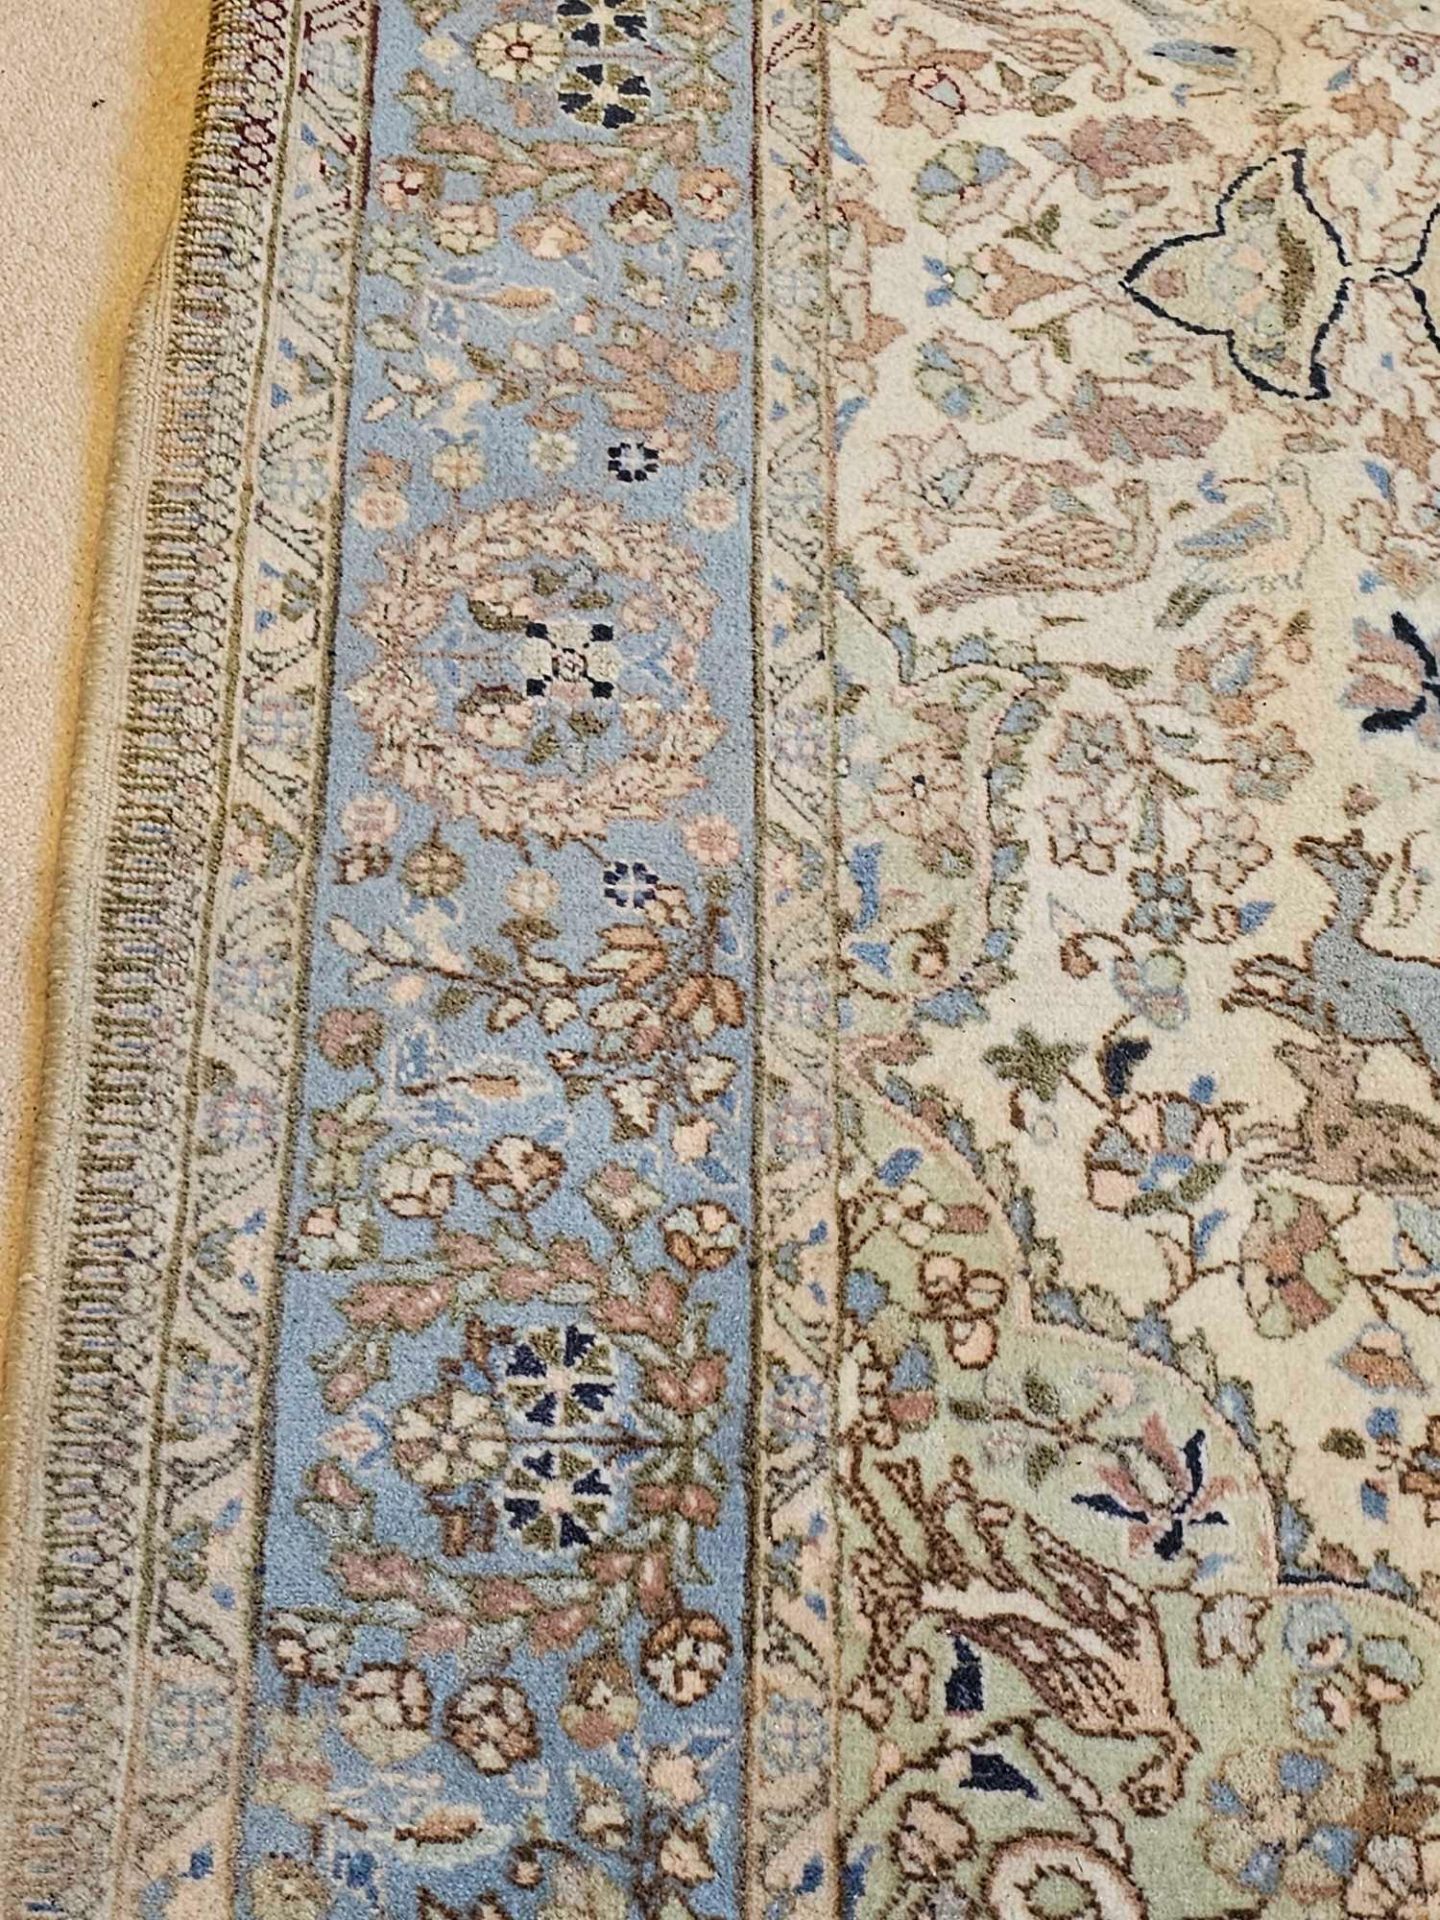 A Persian Patterned Rug The Ivory Field With Lozenge Medallions And Scrolled Spandrels With A - Image 5 of 6